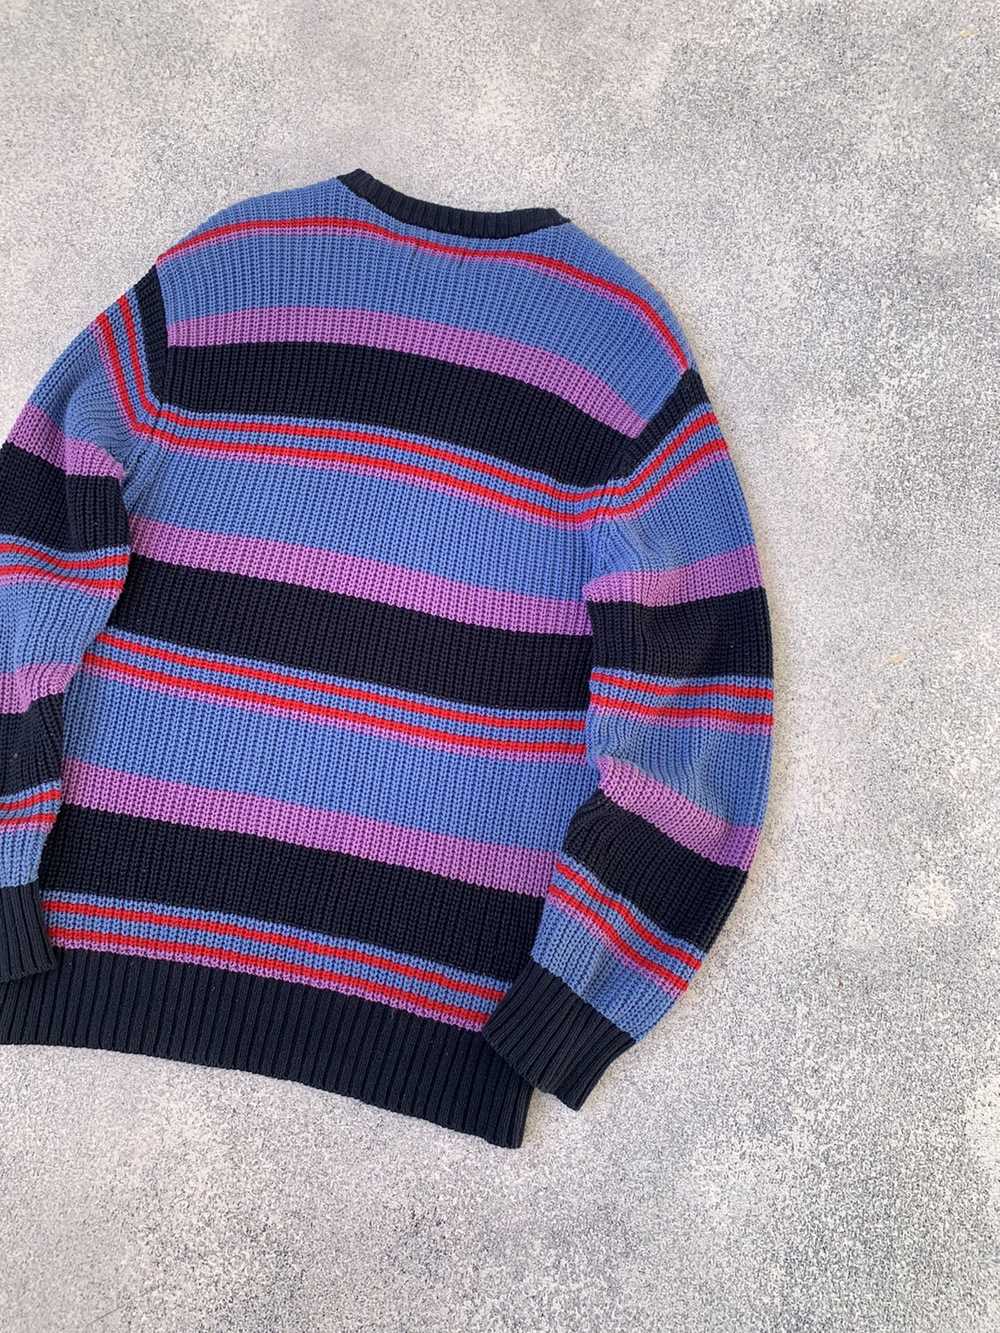 Coloured Cable Knit Sweater × Obey × Vintage Vint… - image 10